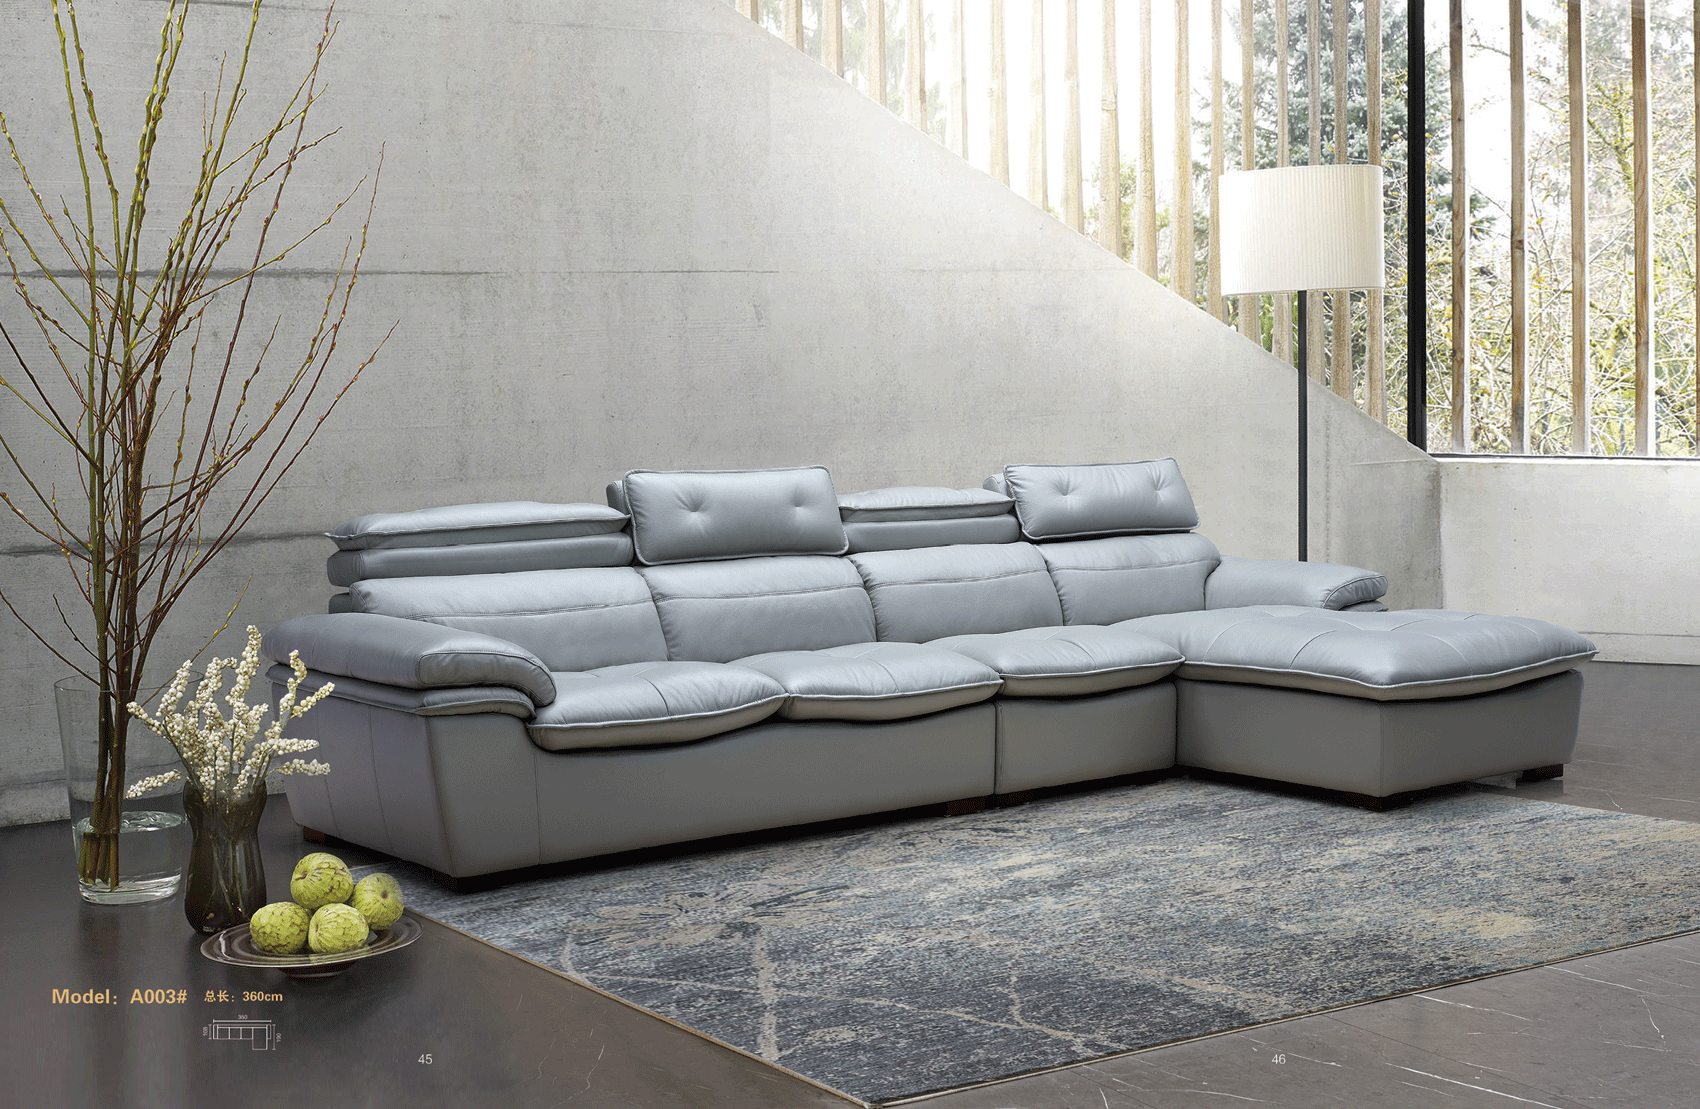 Living Room Furniture Sleepers Sofas Loveseats and Chairs A003 Sectional